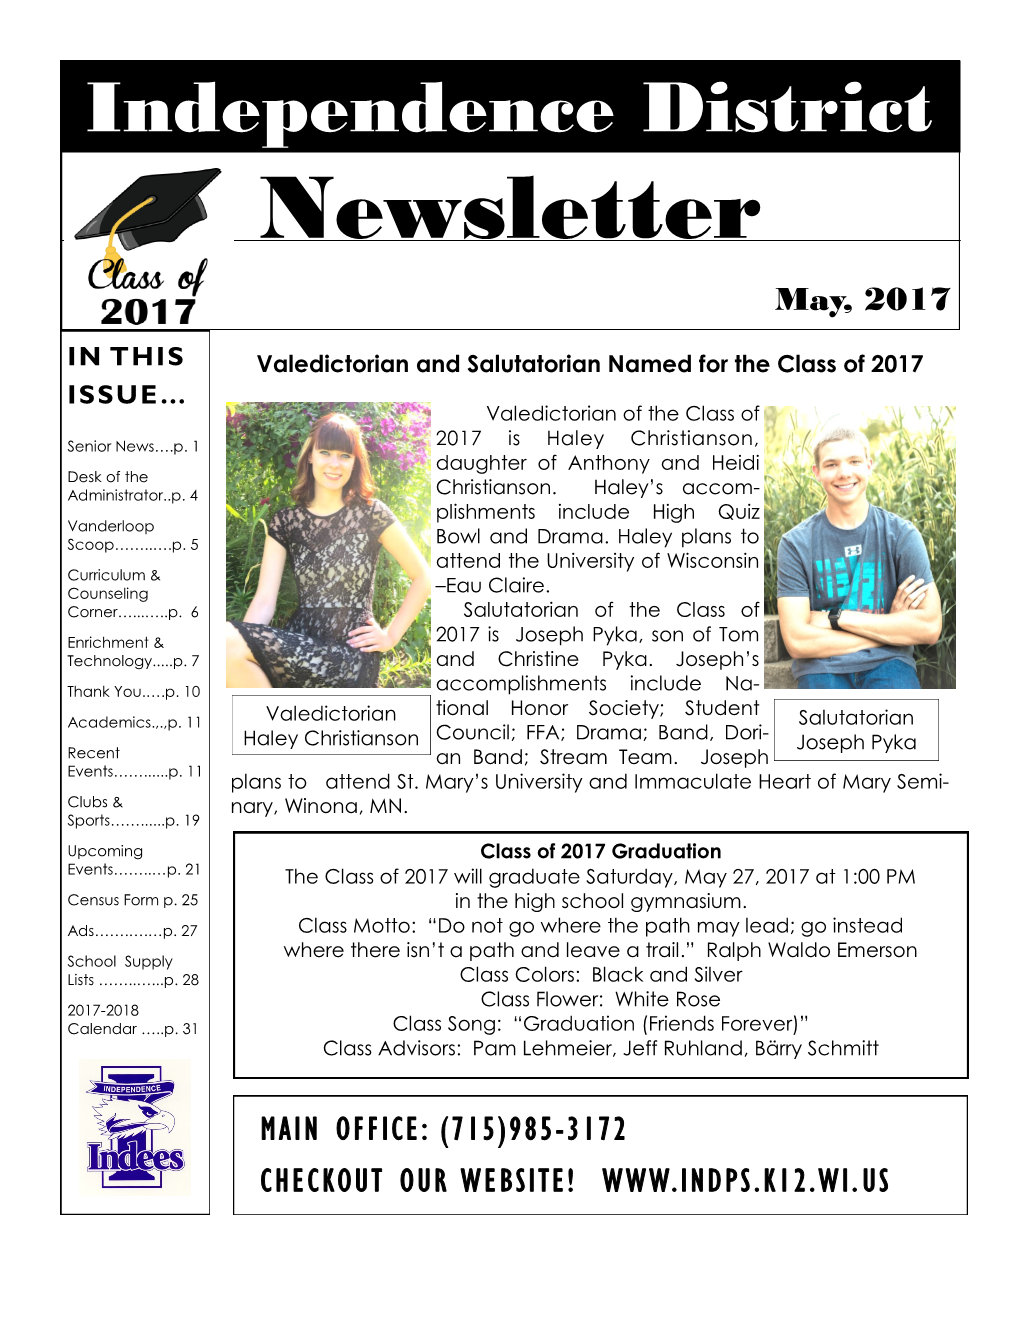 May 2017 Newsletter